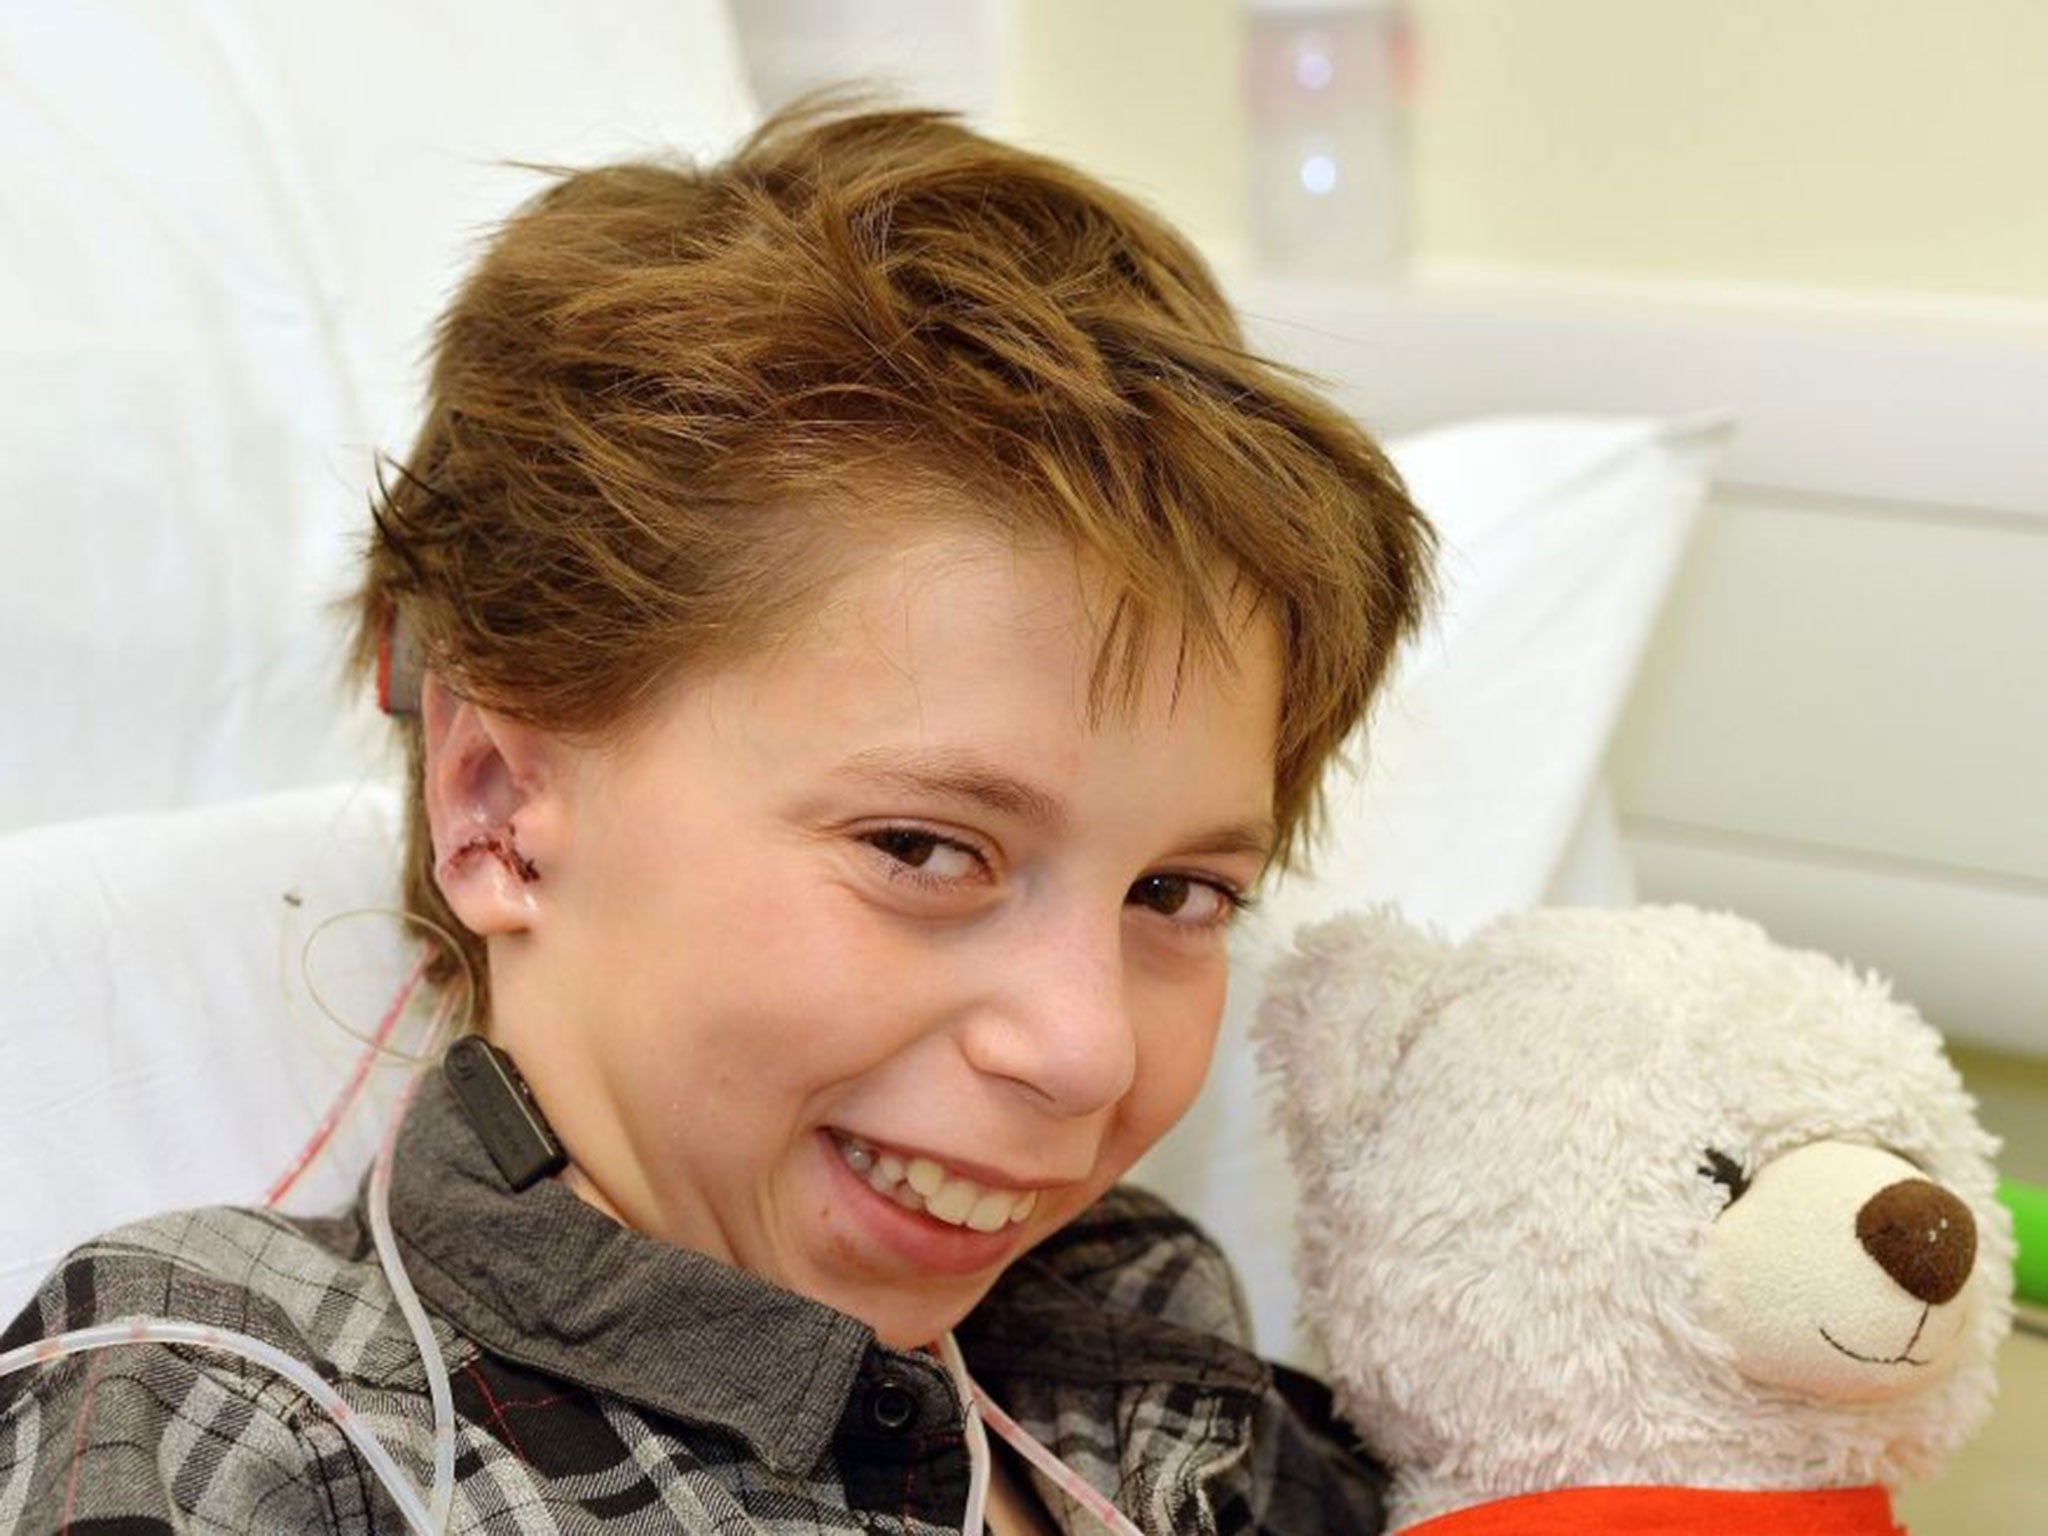 Kieran Sorkin has received a new set of ears after experts at Great Ormond Street Hospital (GOSH) performed a six hour operation where they used cartilage from his ribs to create a pair of ears and grafted them to his head